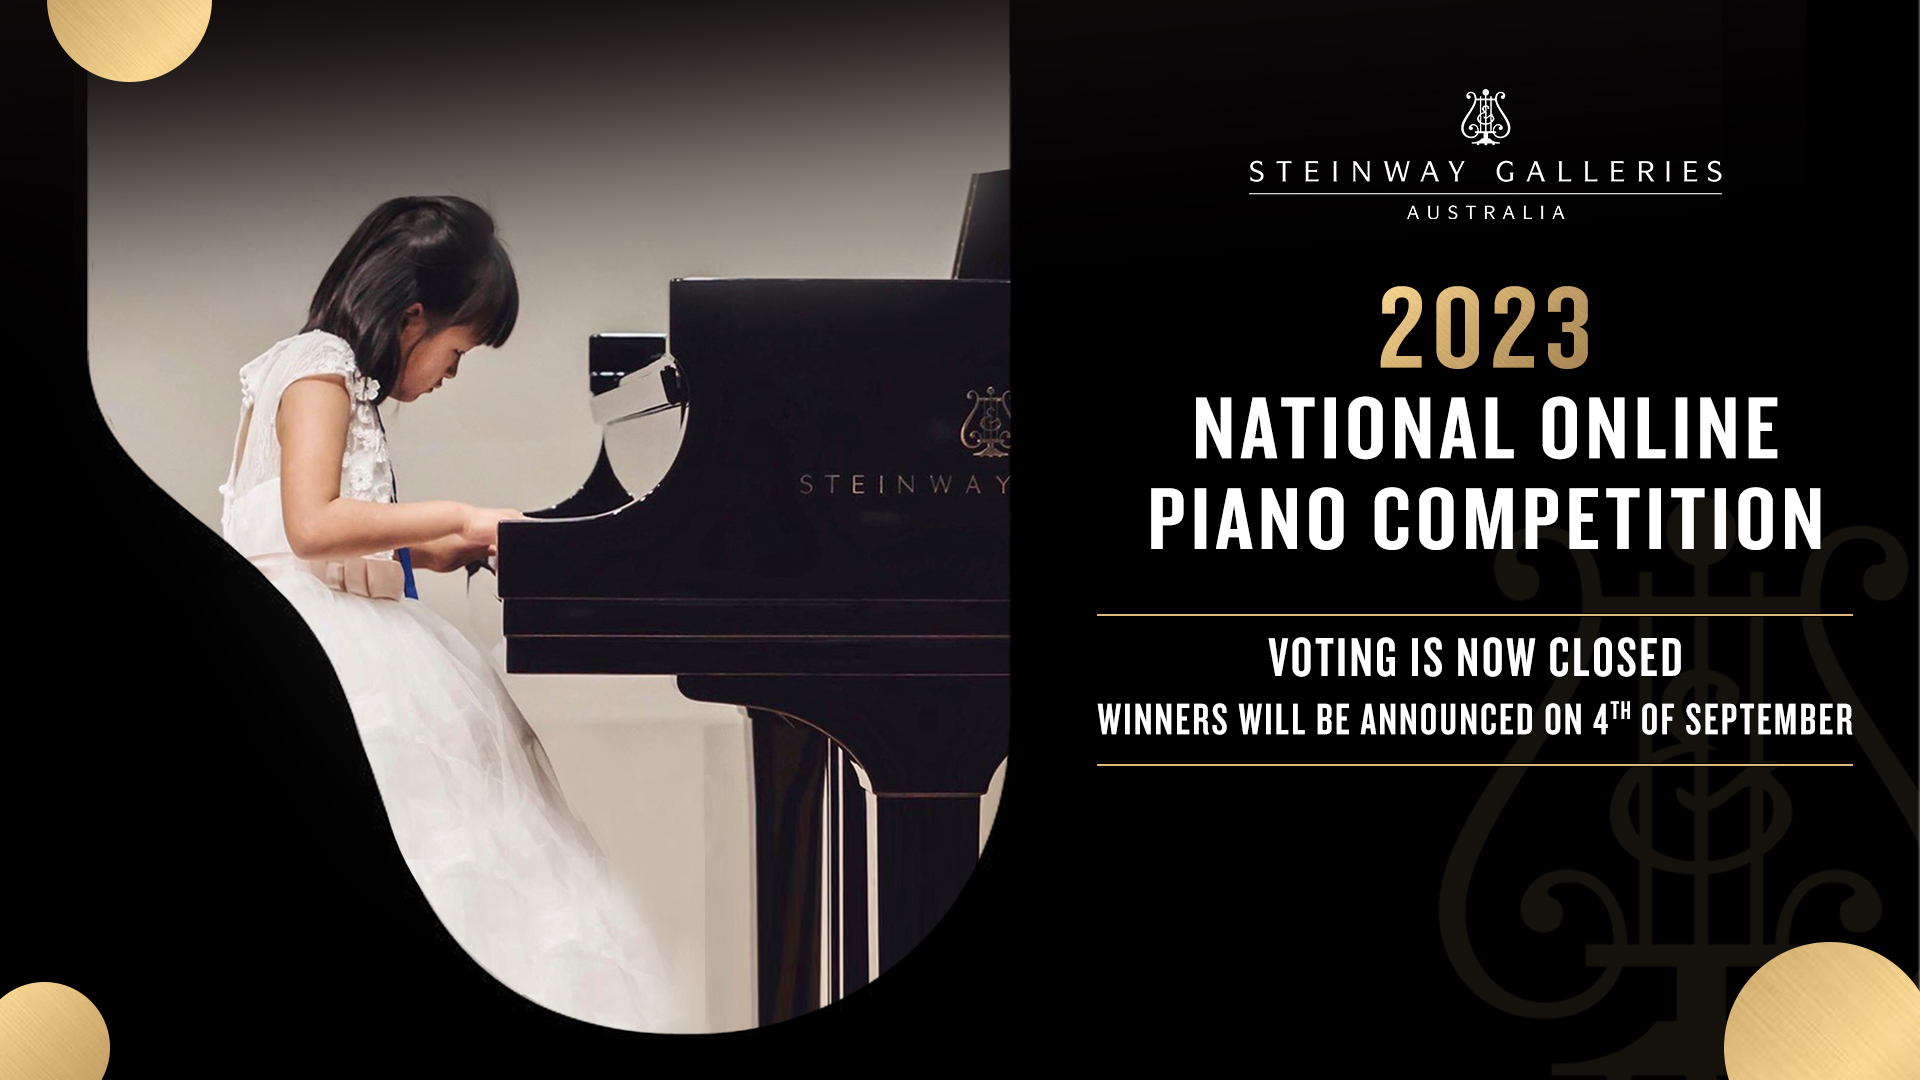 Voting Period Closed for the 2023 Steinway Galleries Australia National Online Piano Competition